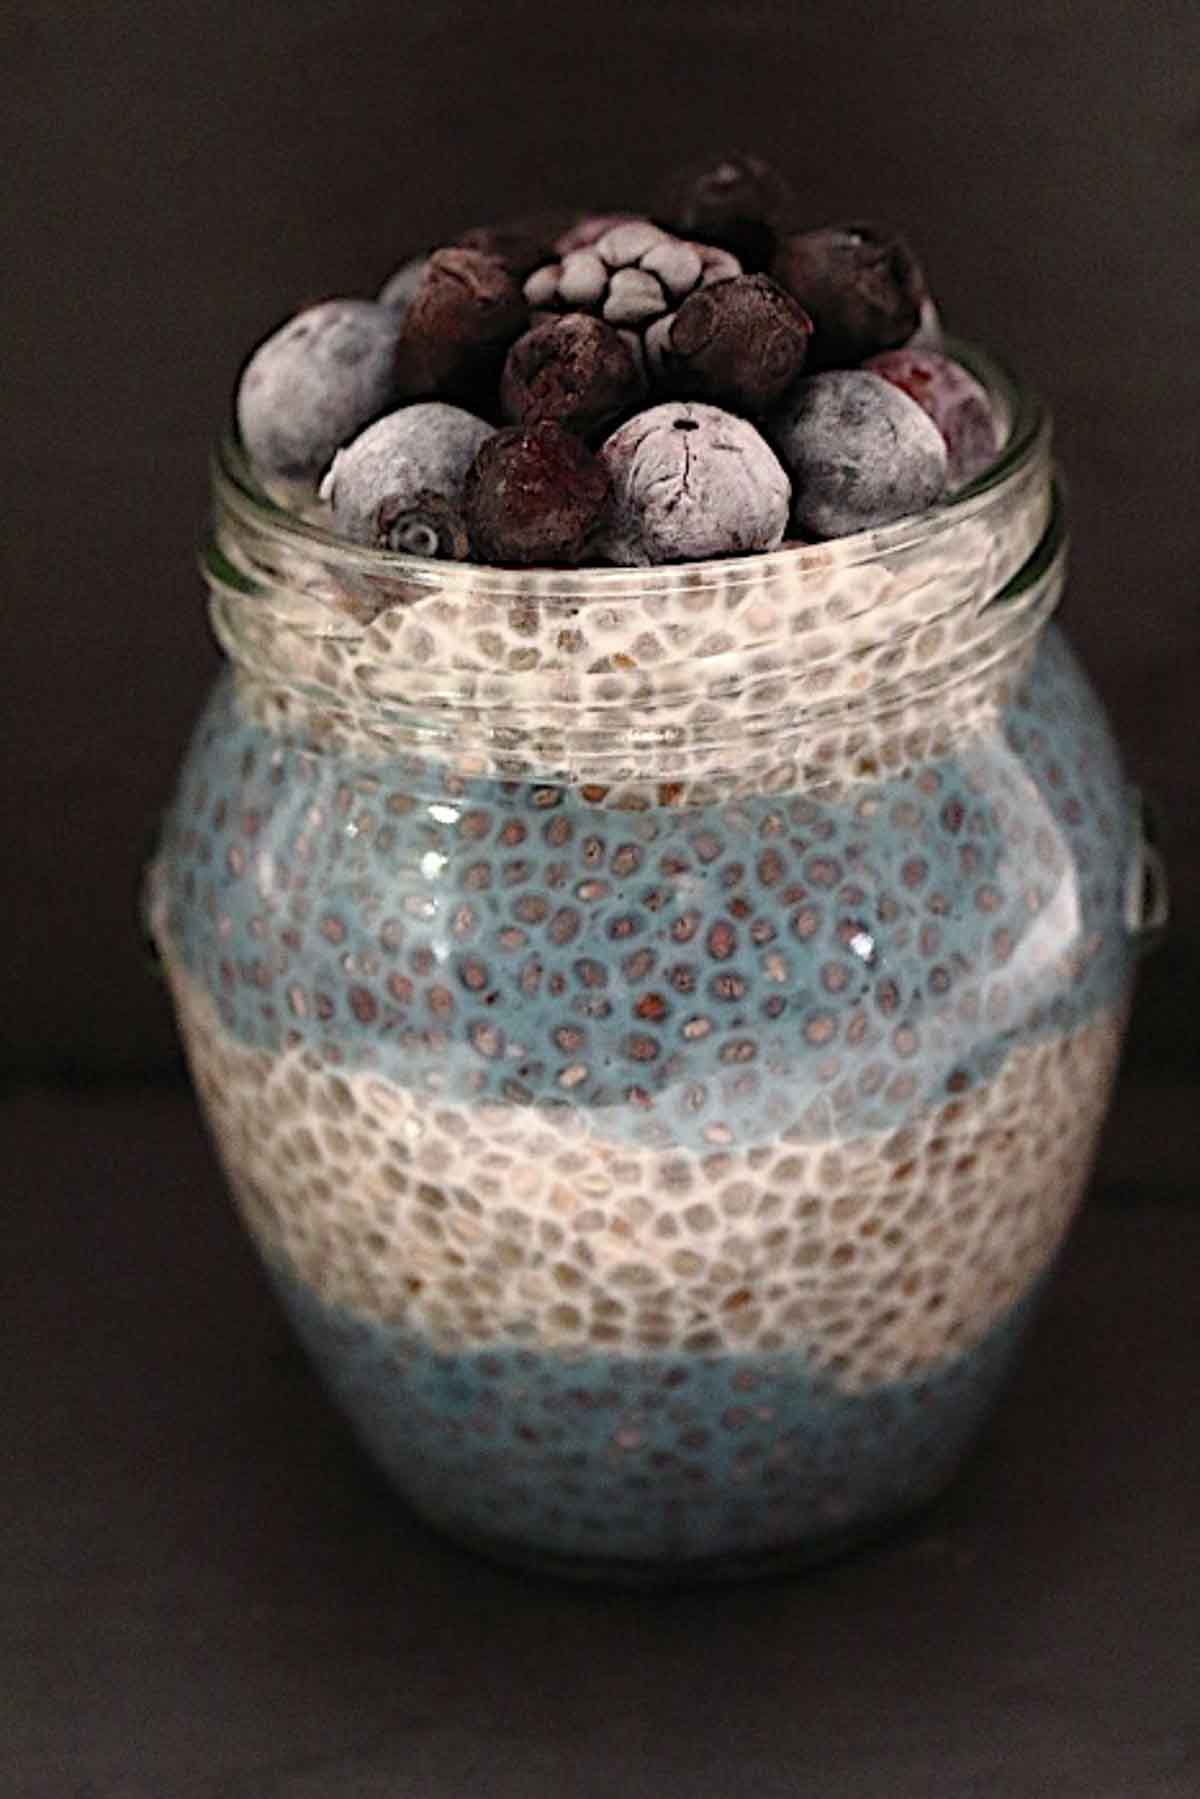 Chia Blueberry Pudding in a glass.